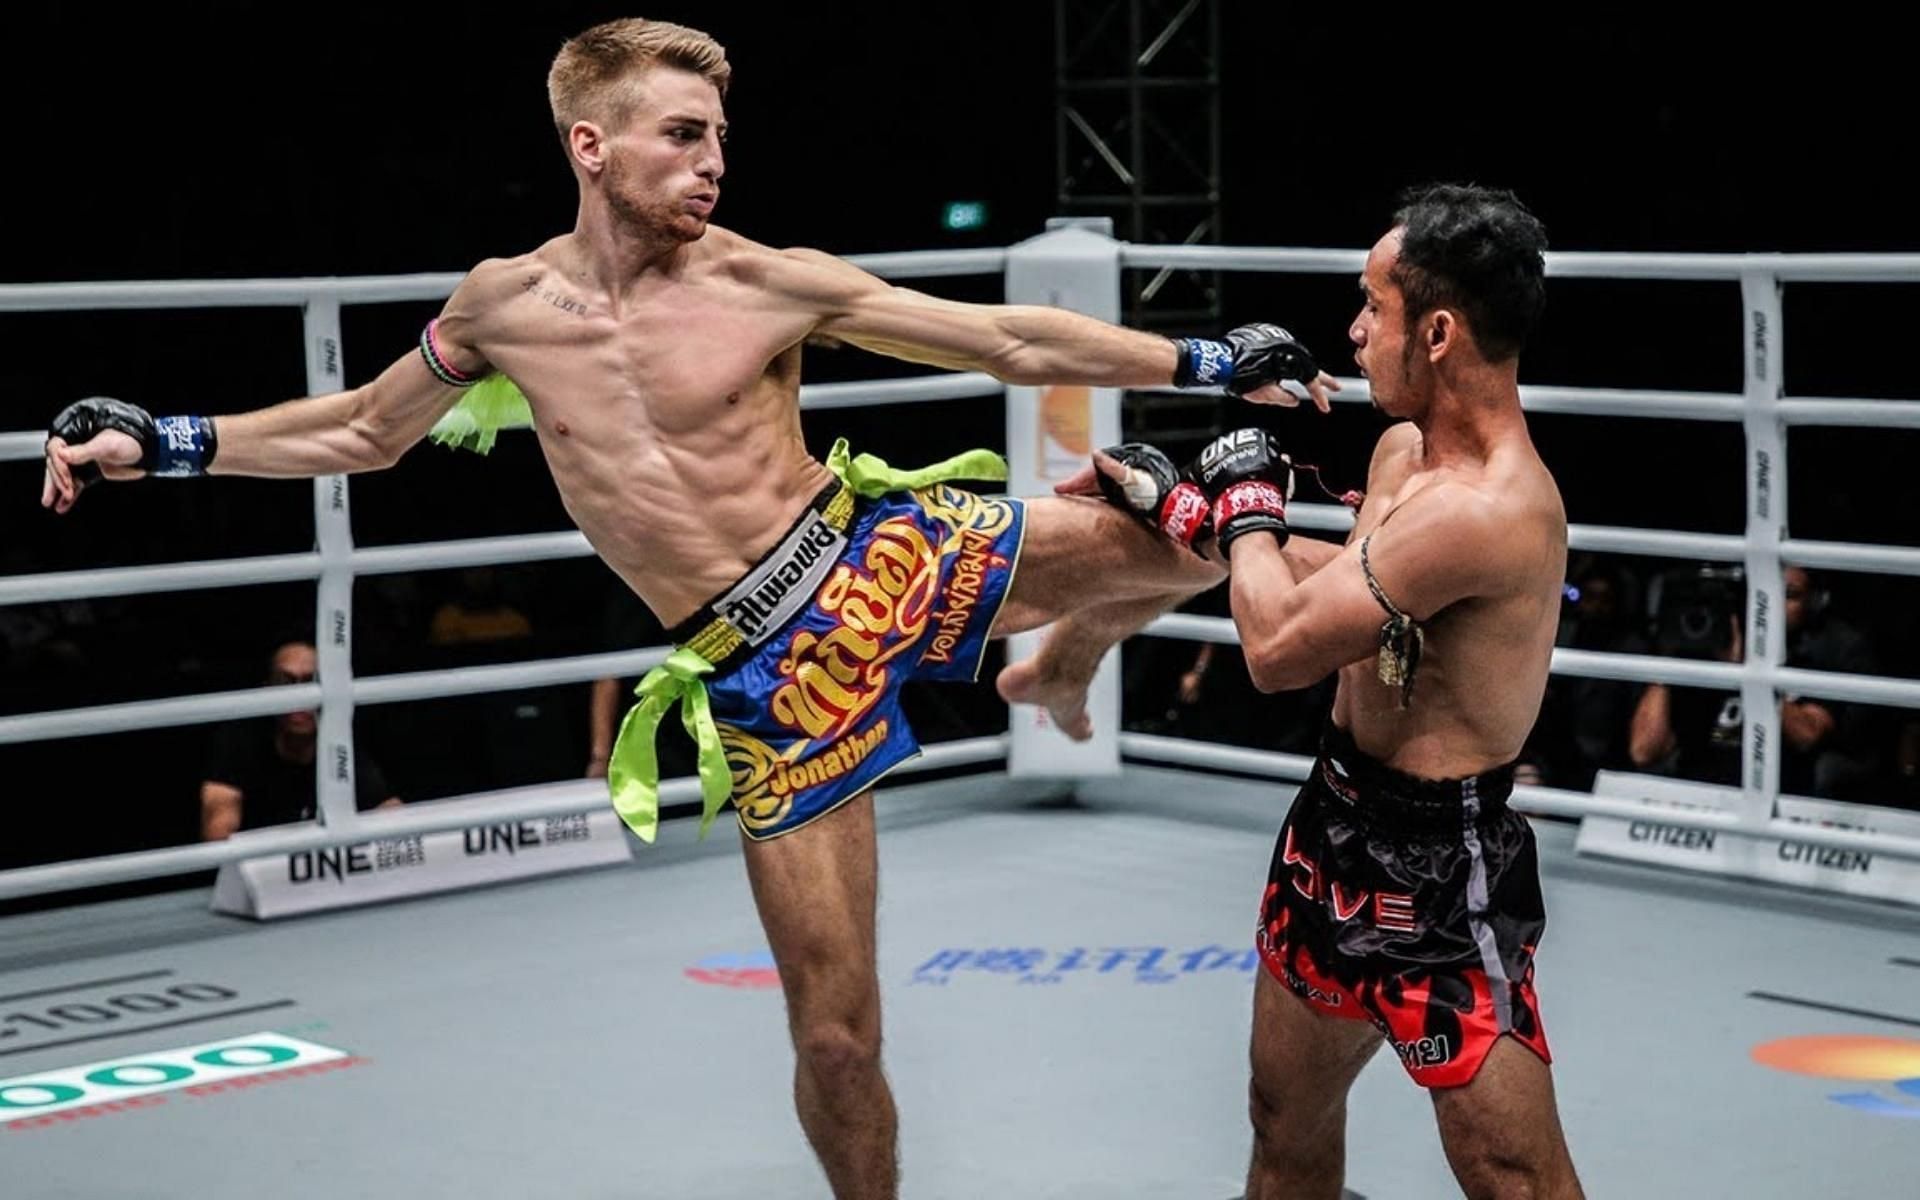 Jonathan Haggerty (left) and Sam-A Giayanghadao (right) put on a classic back in 2019. (Image courtesy of ONE Championship)